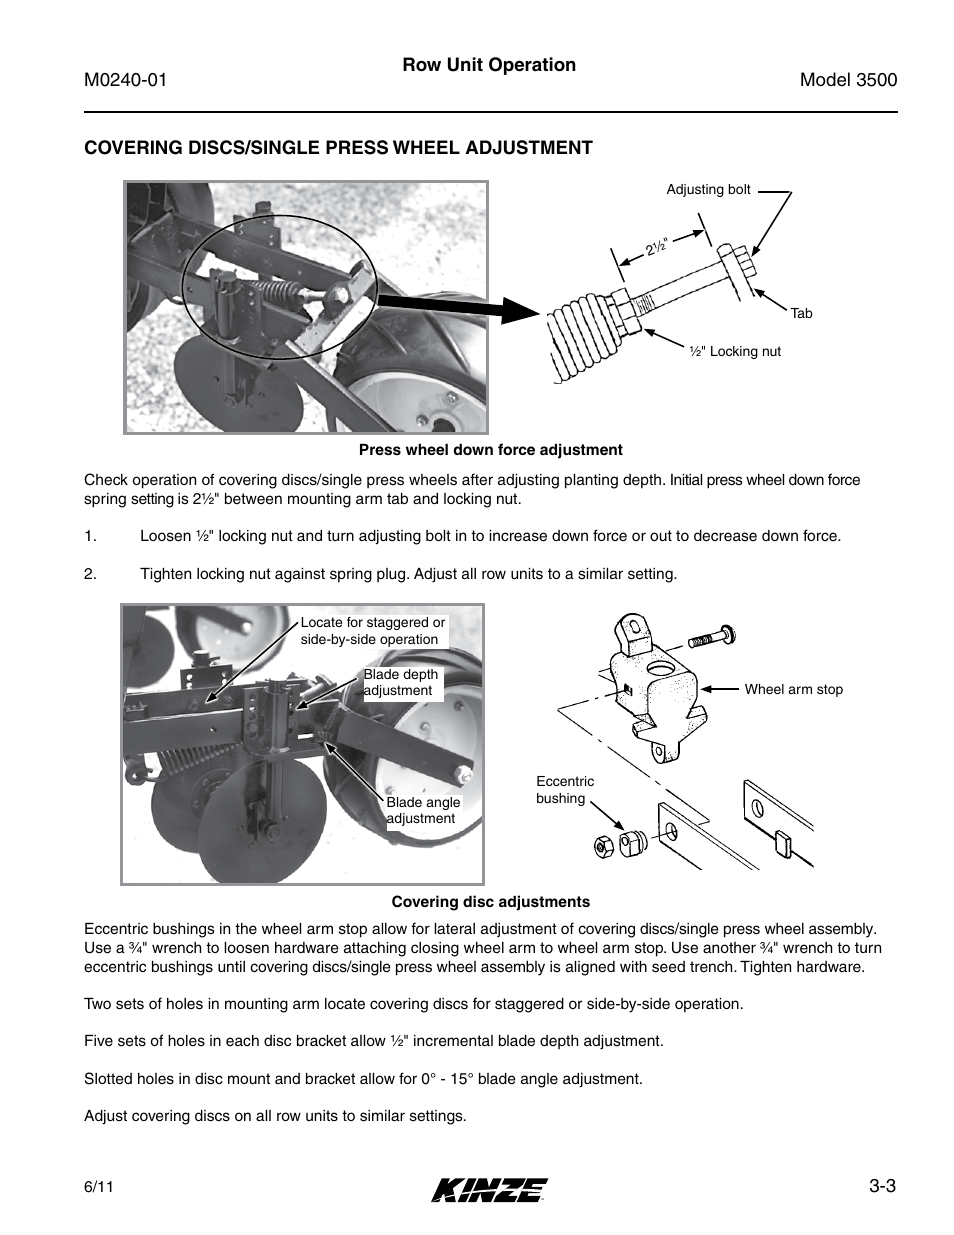 Covering discs/single press wheel adjustment, Covering discs/single press wheel adjustment -3 | Kinze 3500 Lift and Rotate Planter Rev. 7/14 User Manual | Page 37 / 140